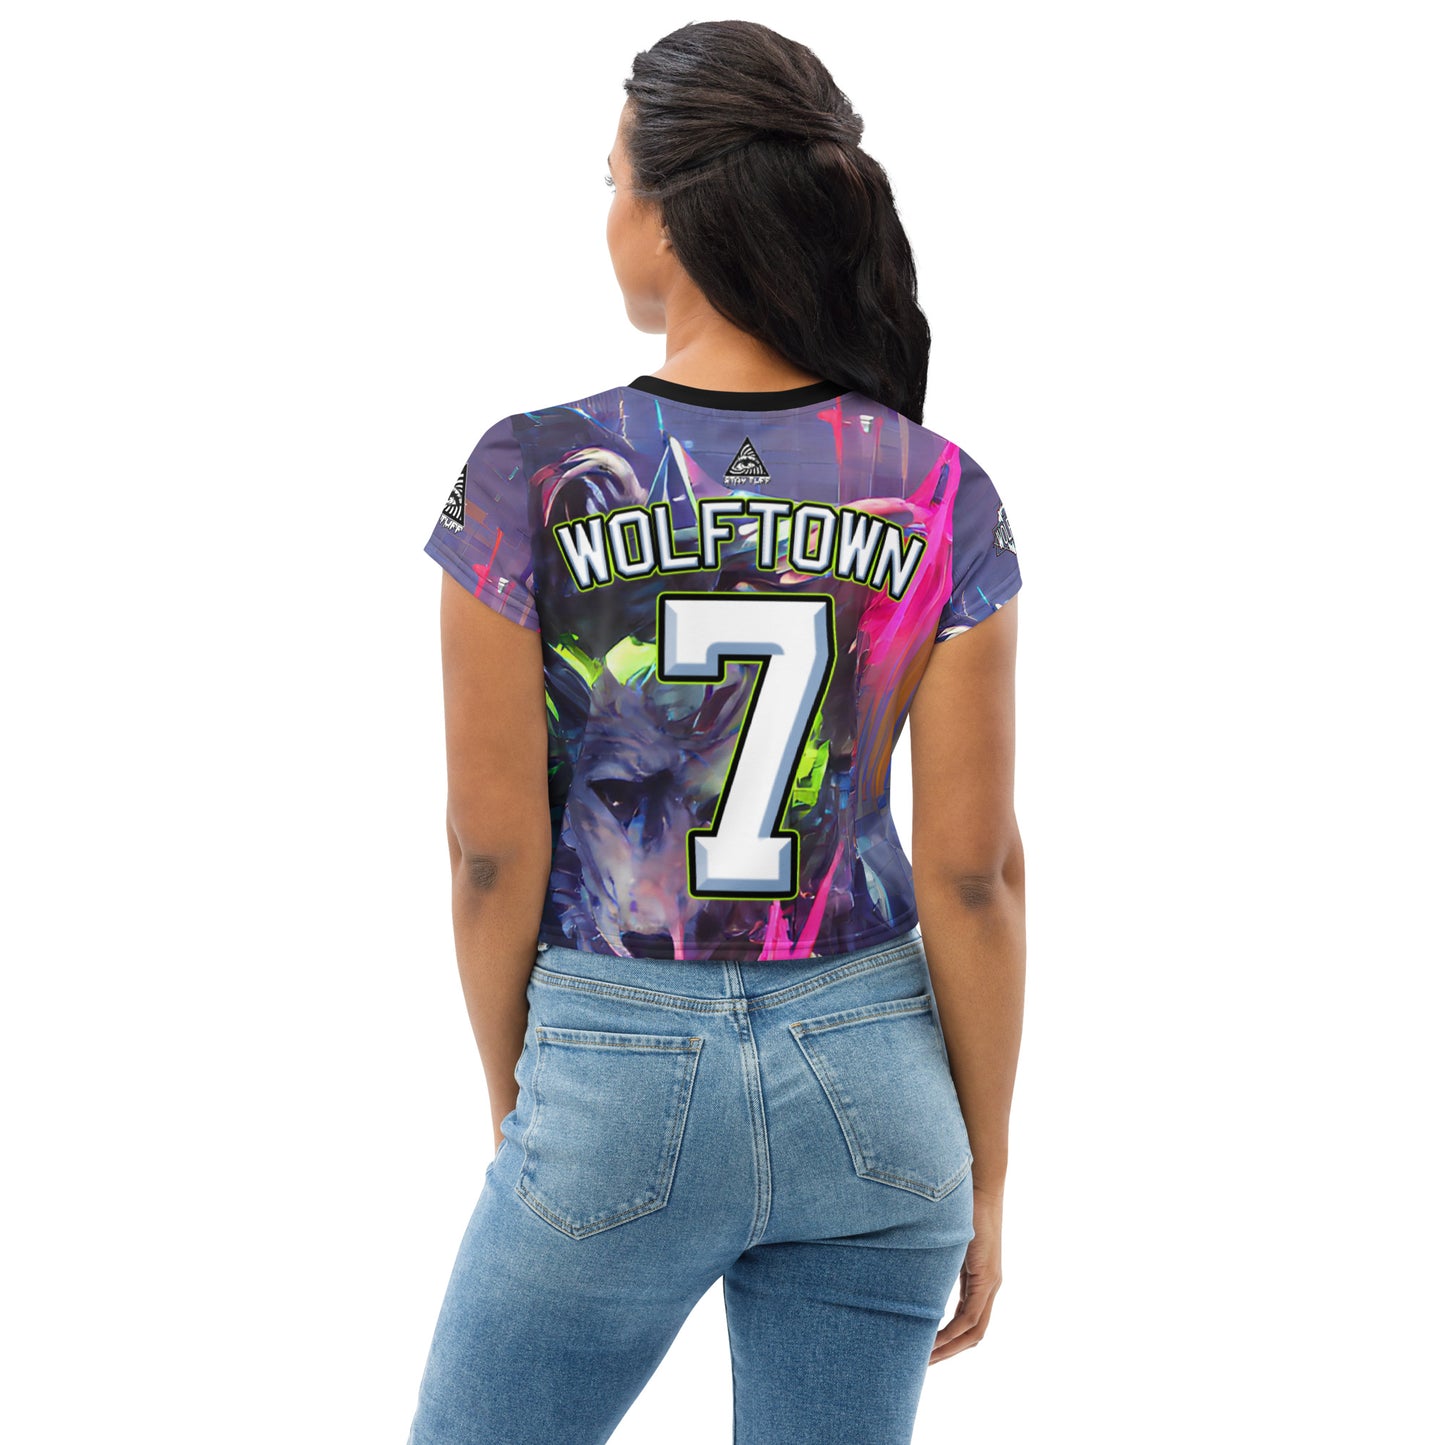 WOLFTOWN 'ANXIETY' (All-Over Print Crop Top)